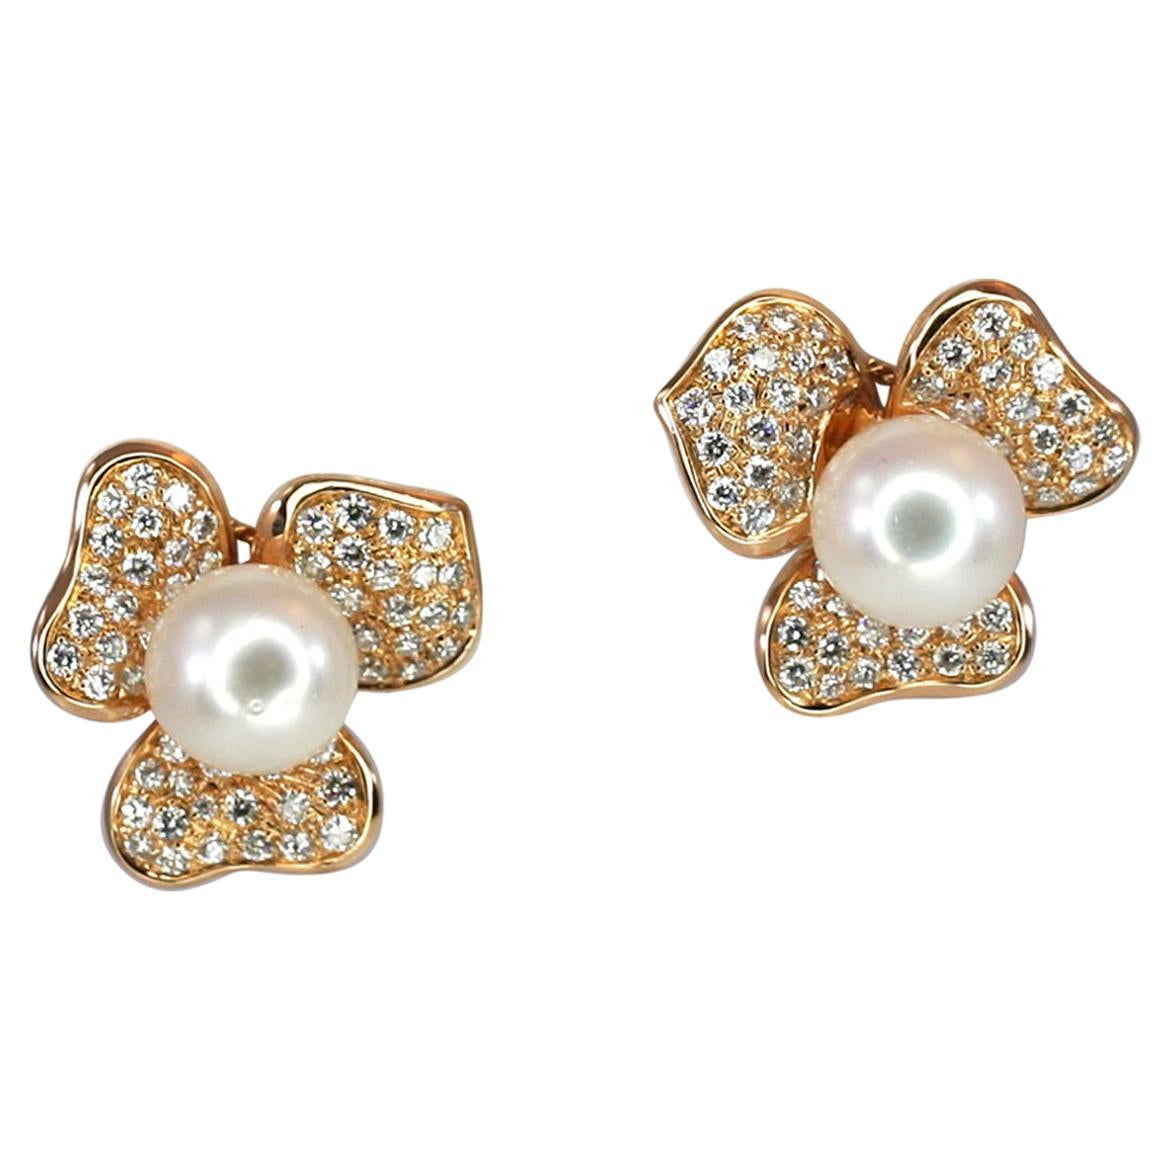 Georgios Collections 18 Karat Rose Gold South Sea Pearl and Diamond Earrings